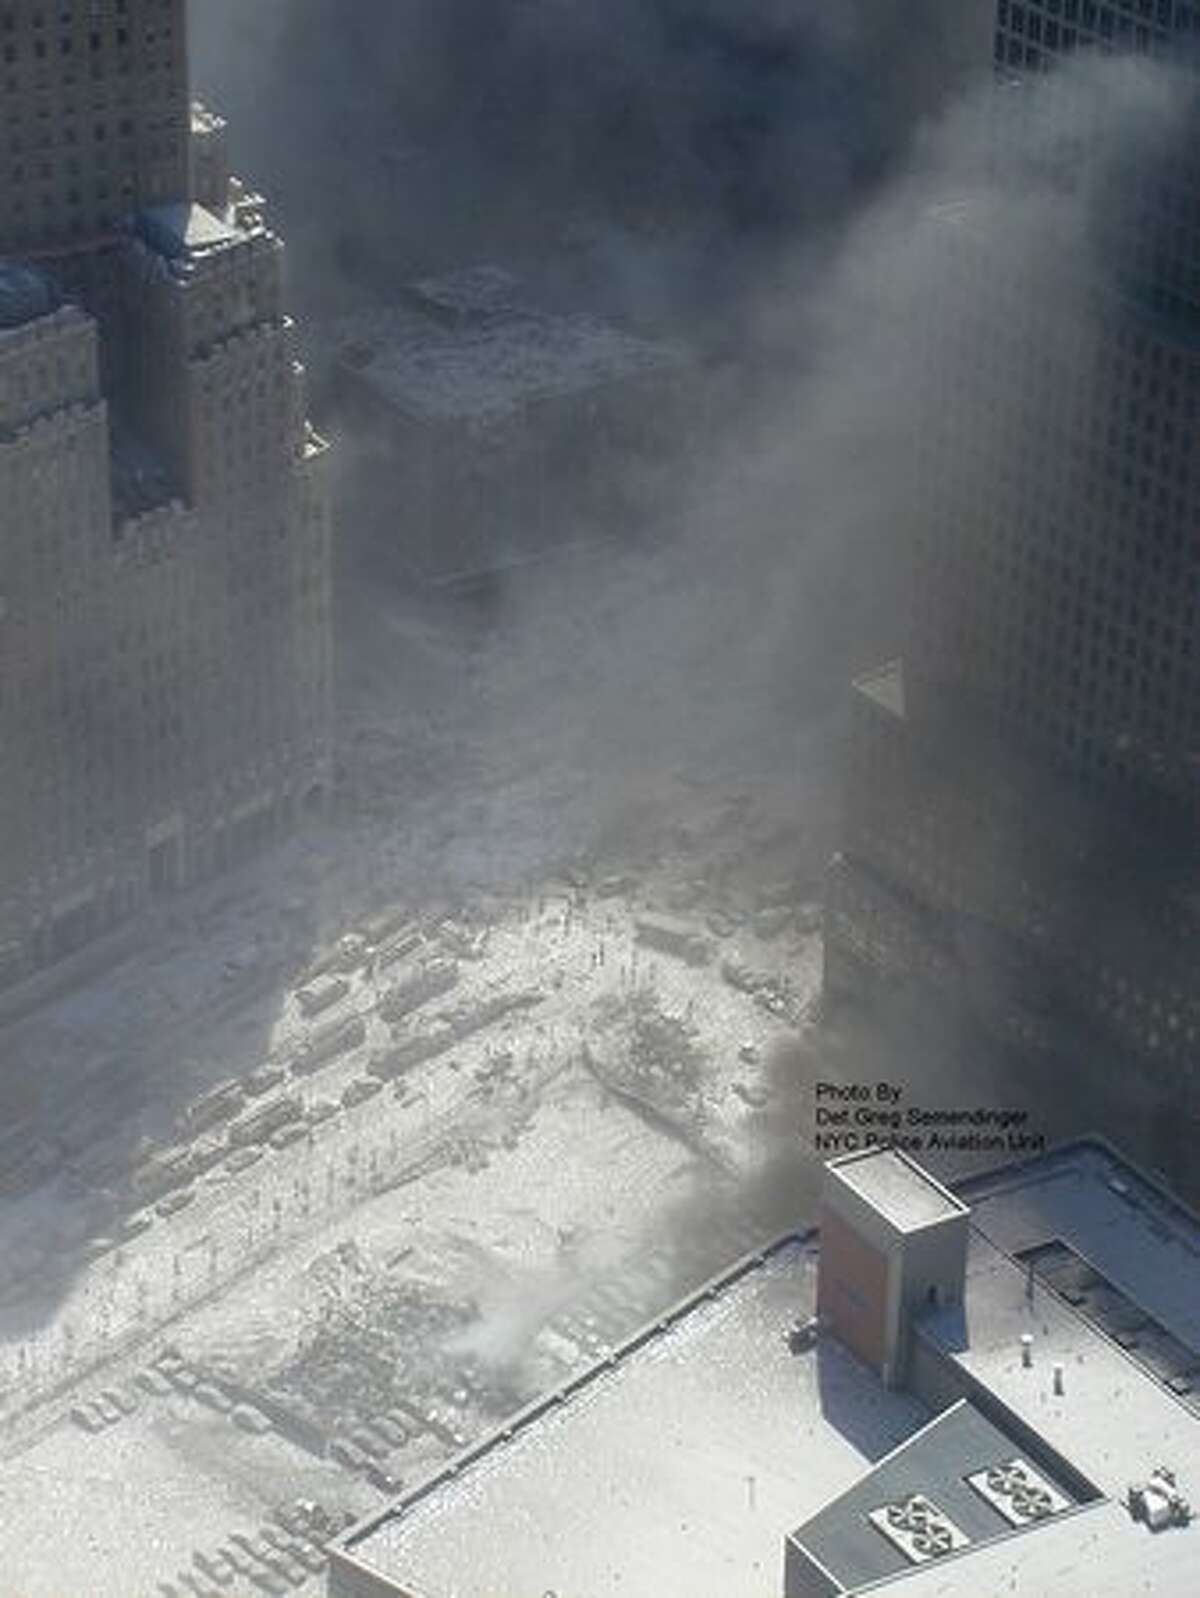 This photo taken Sept. 11, 2001 by the New York City Police Department and obtained by ABC News in 2010, which claims to have obtained it under the Freedom of Information Act, shows white ash covering the downtown area near the grounds of the World Trade Center in New York. (AP Photo/NYPD via ABC News, Det. Greg Semendinger)